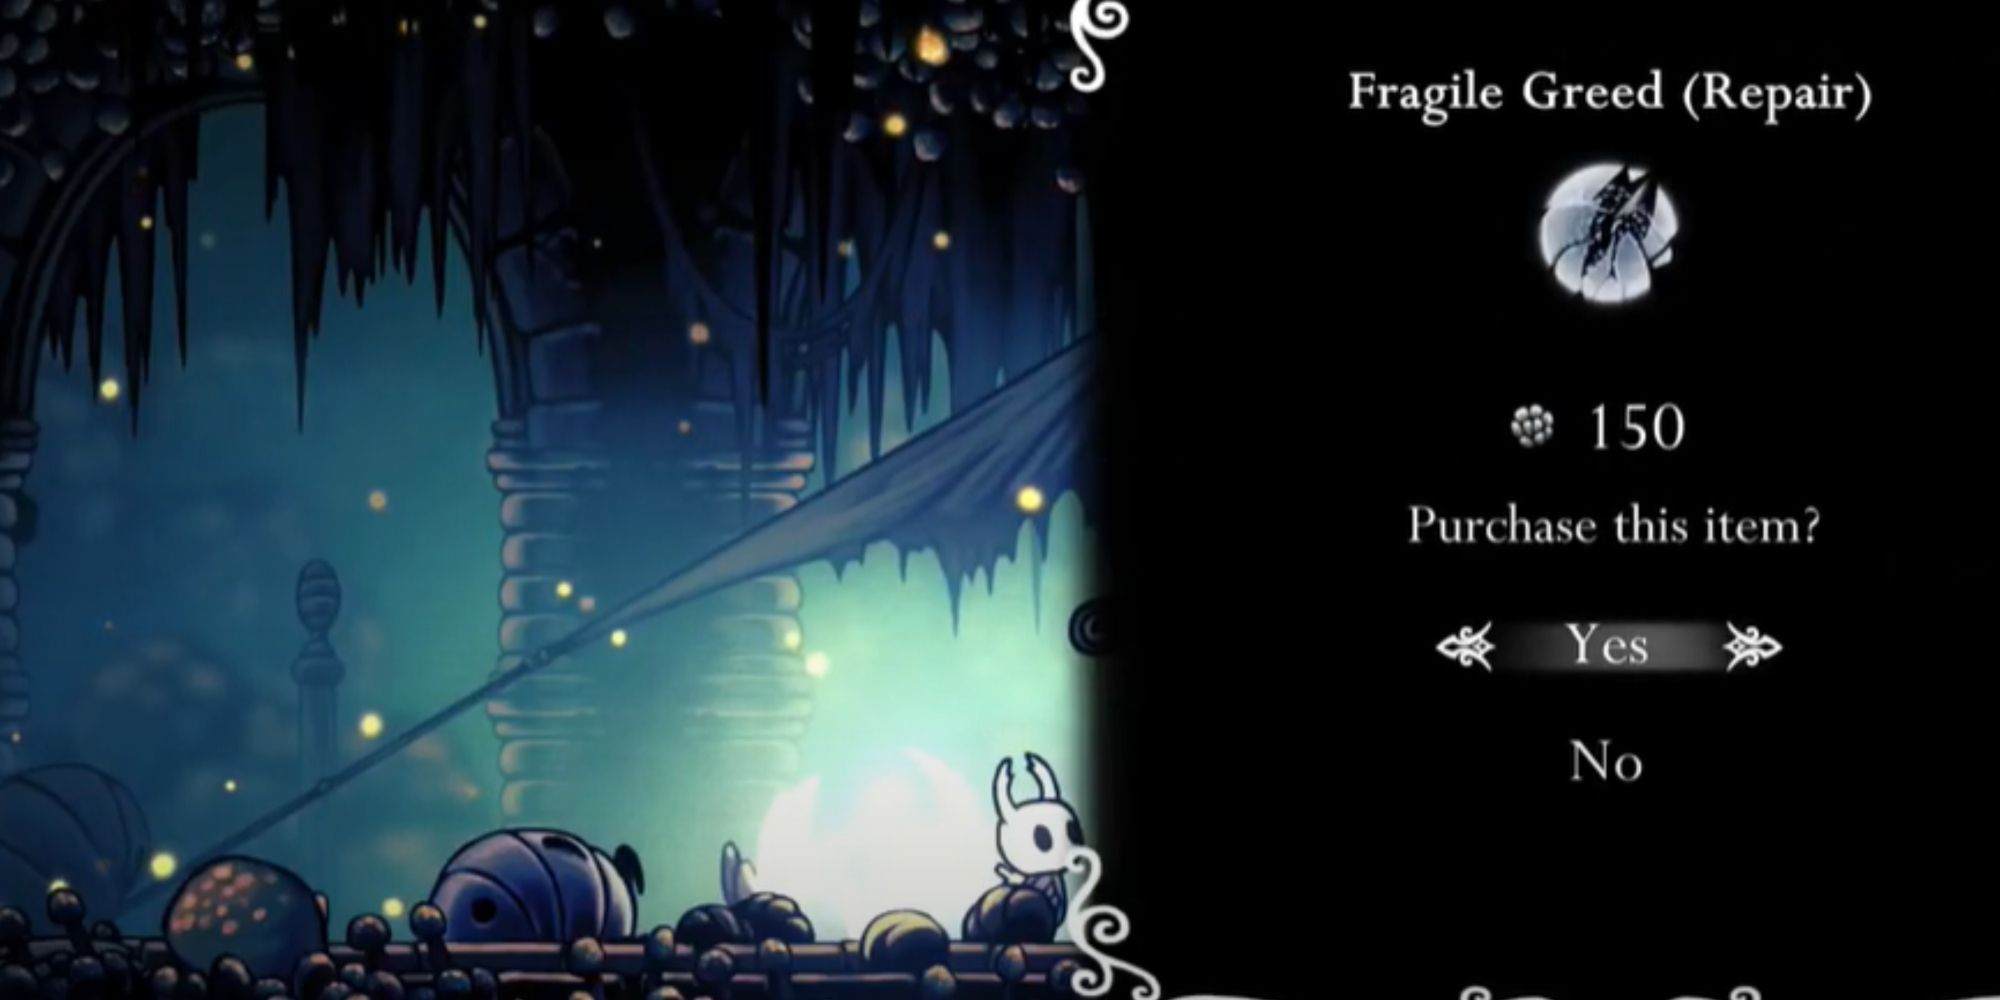 The Knight repairing the Fragile Greed charm in Hollow Knight